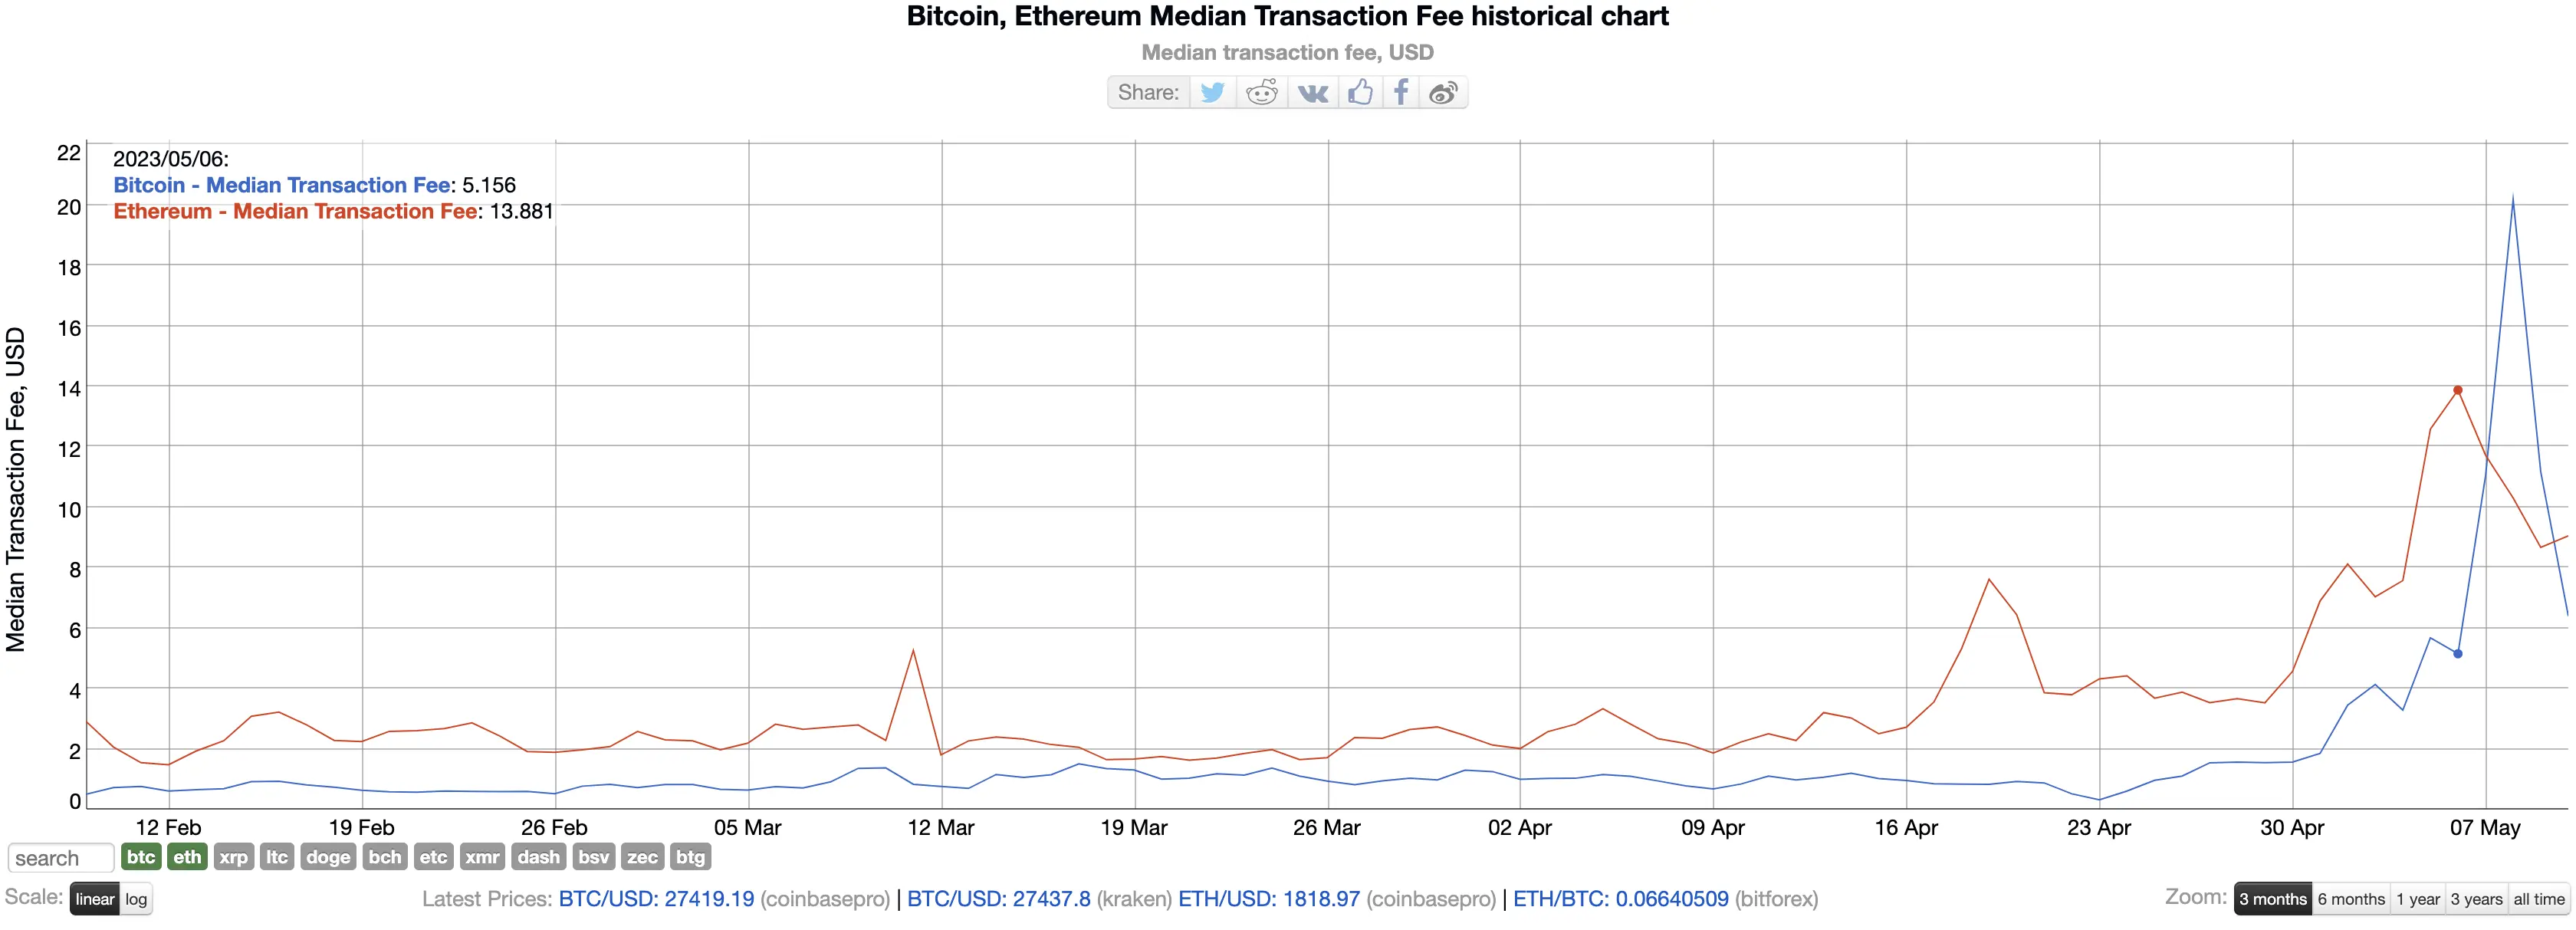 comparison between btc and eth median fee charts